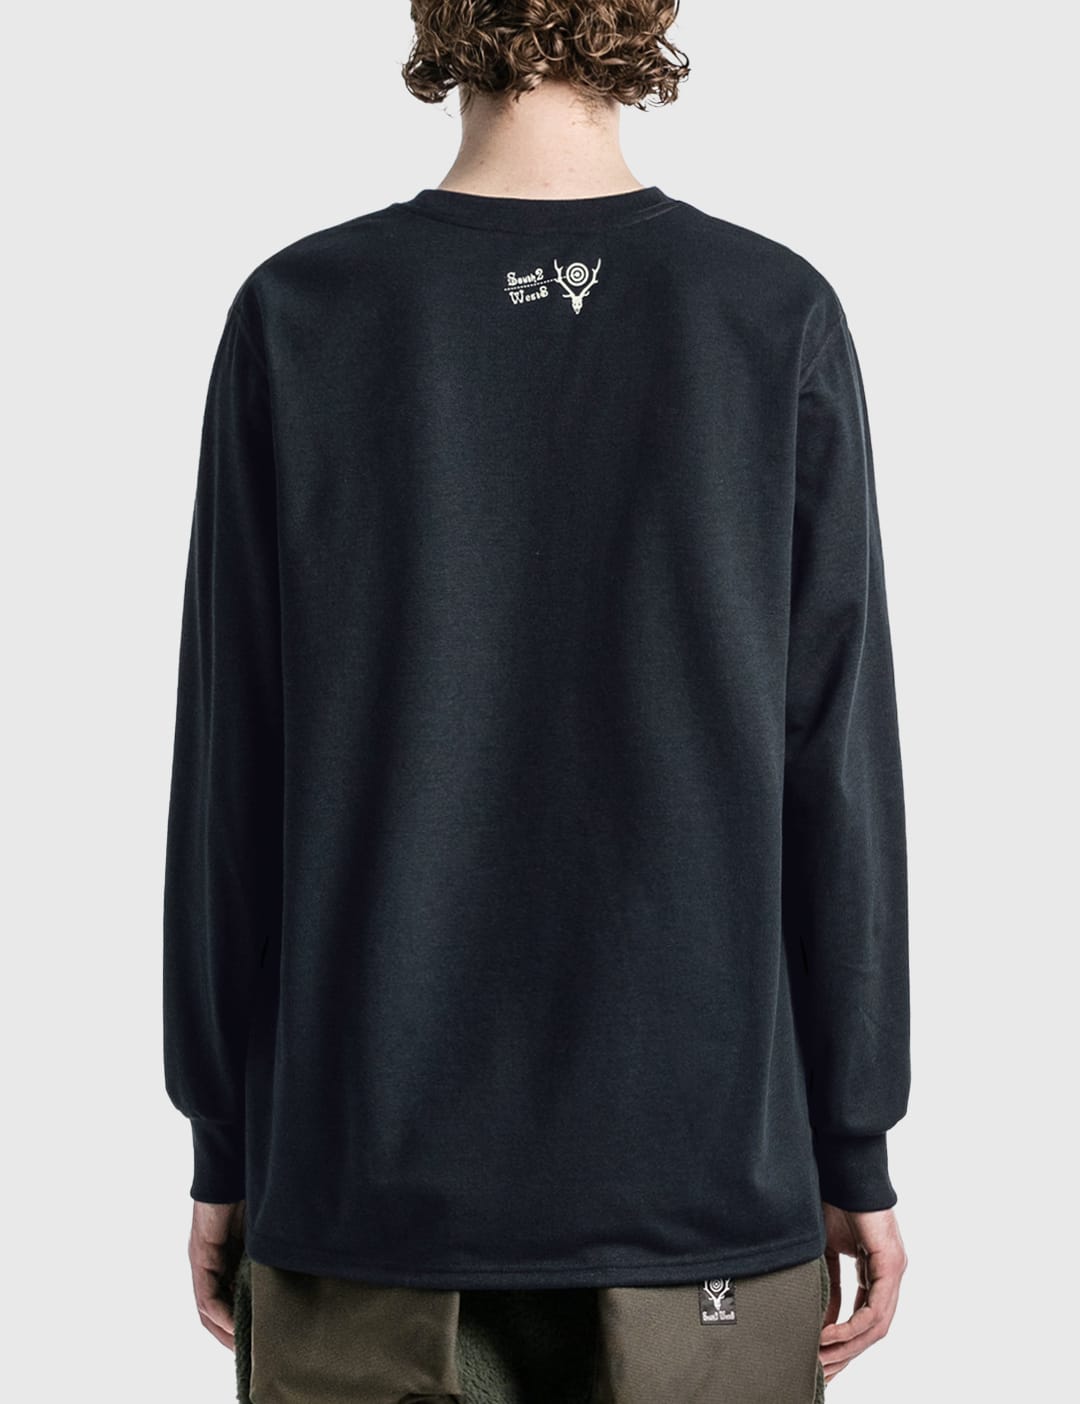 South2 West8 - Maze Crewneck T-shirt | HBX - Globally Curated 